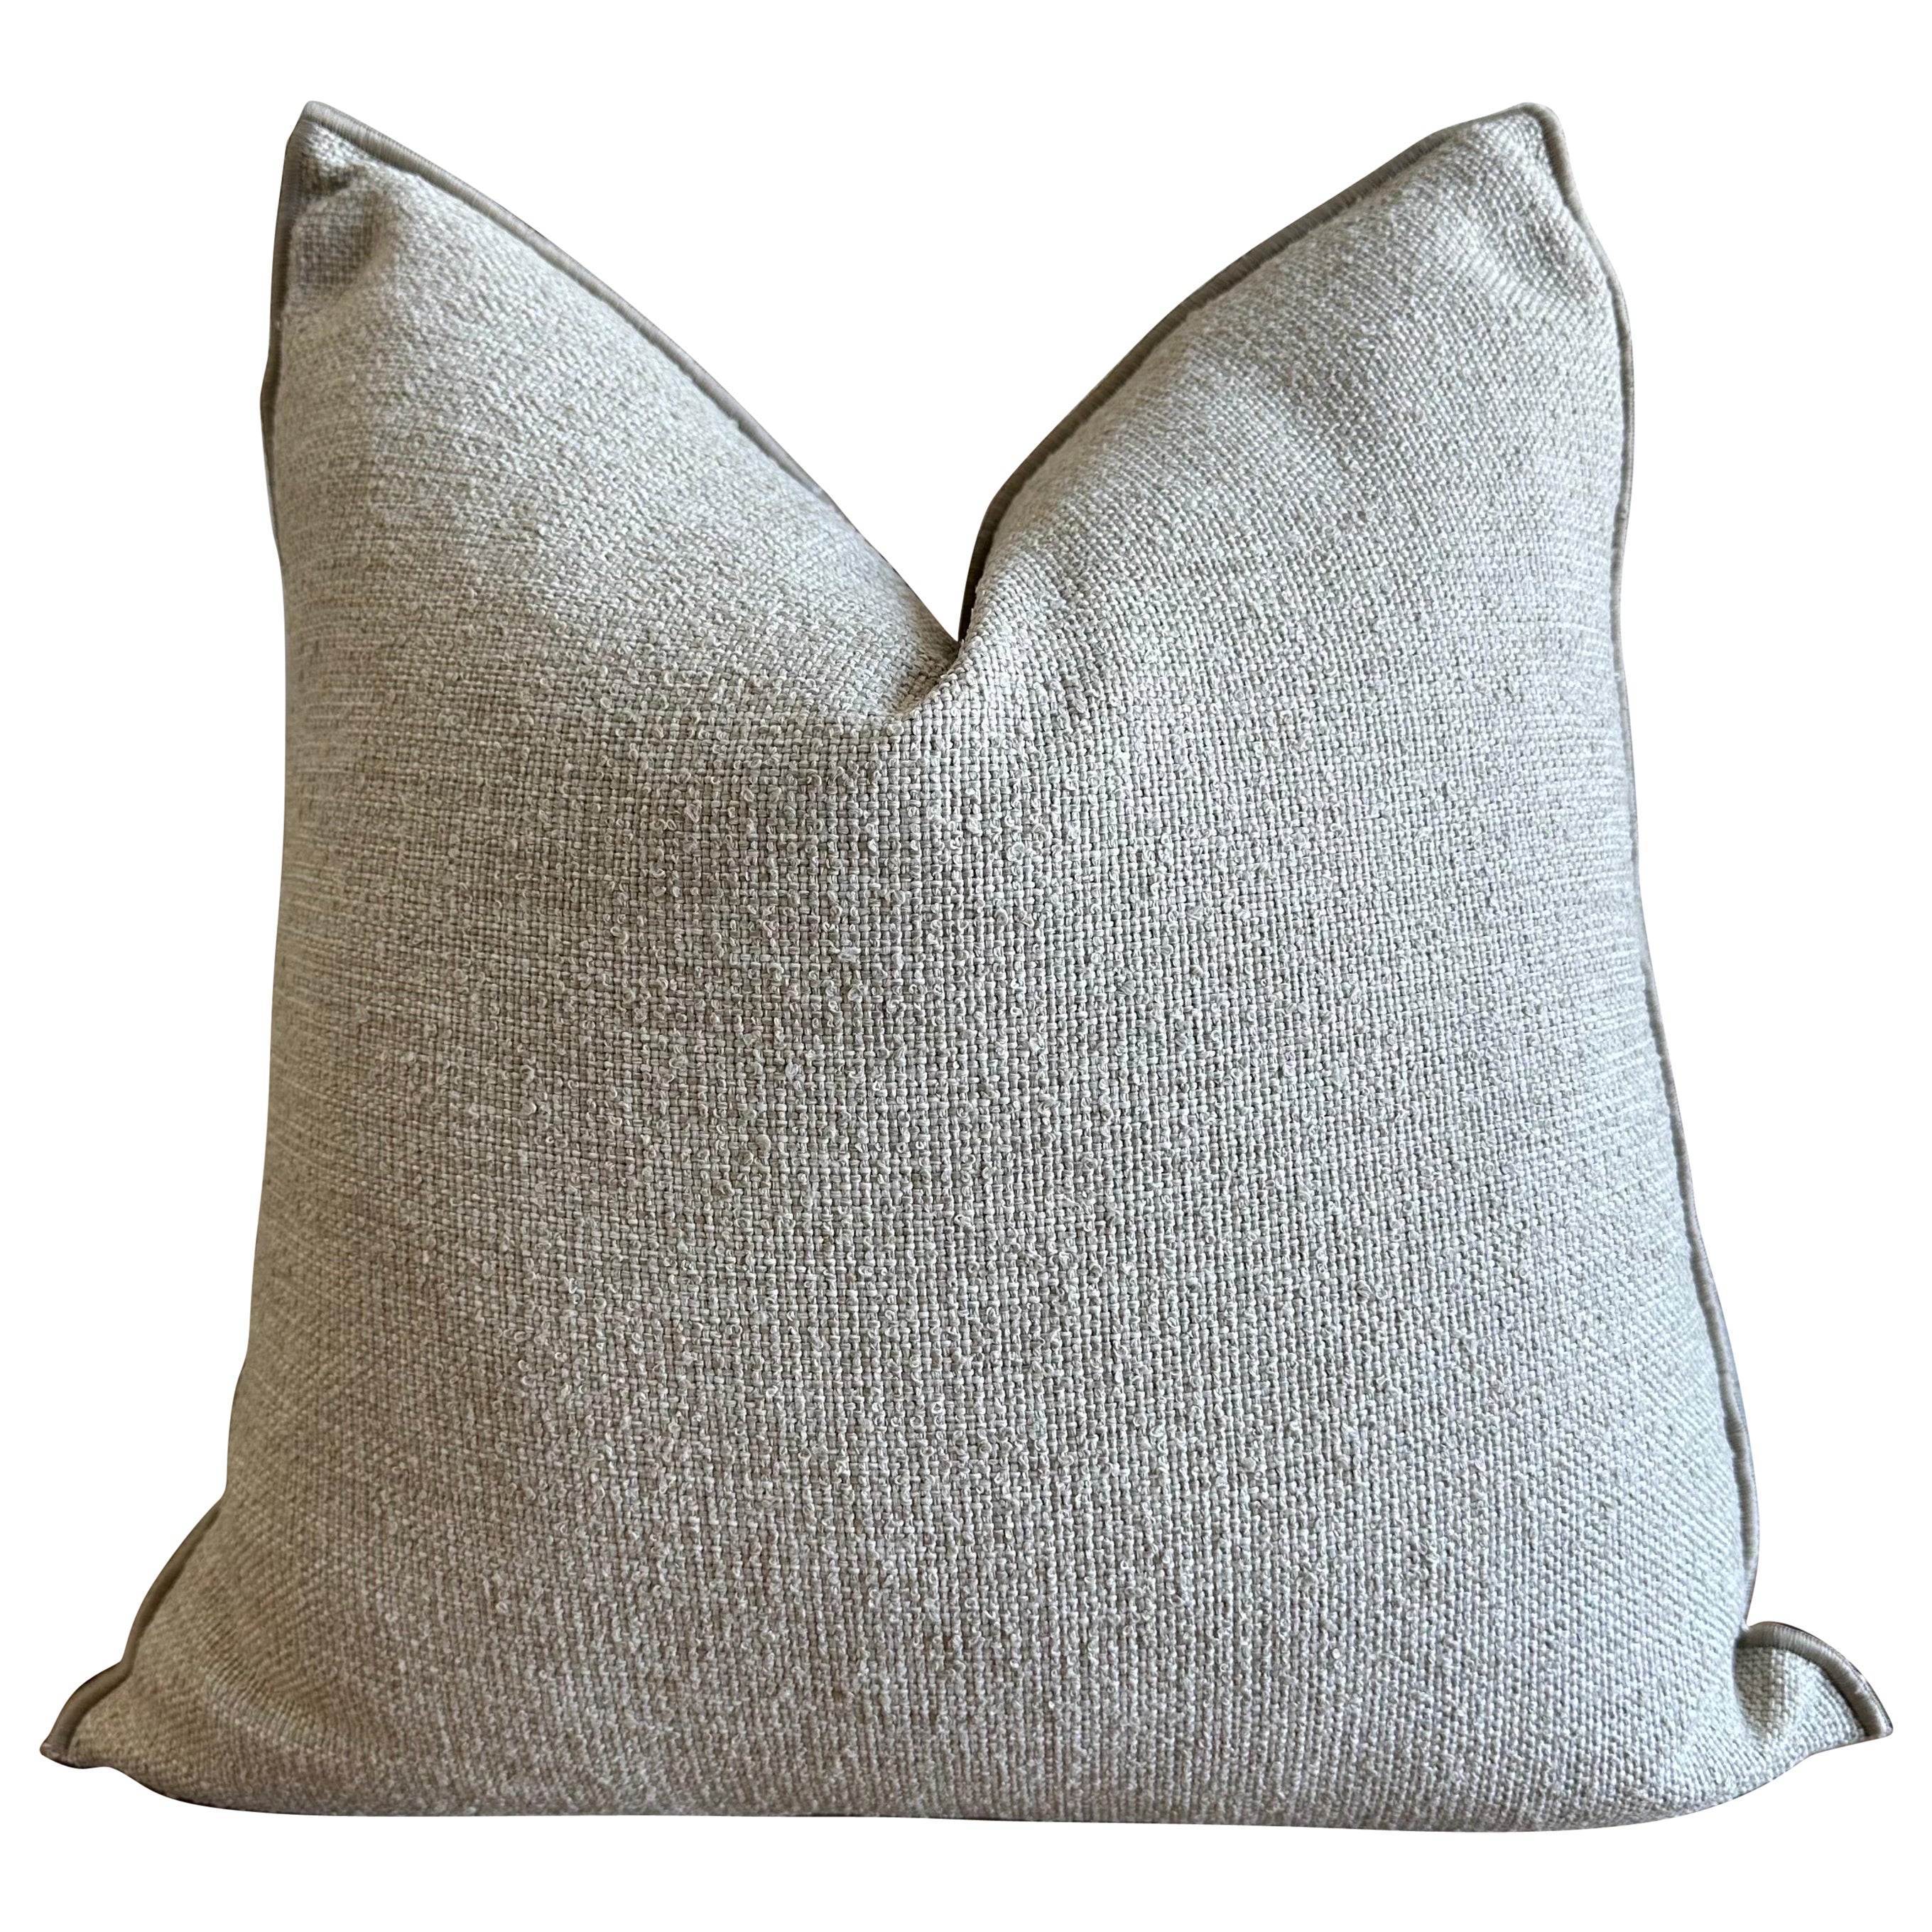 Custom Made French Outdoor Pillows in Natural Textured Outdoor Material For Sale